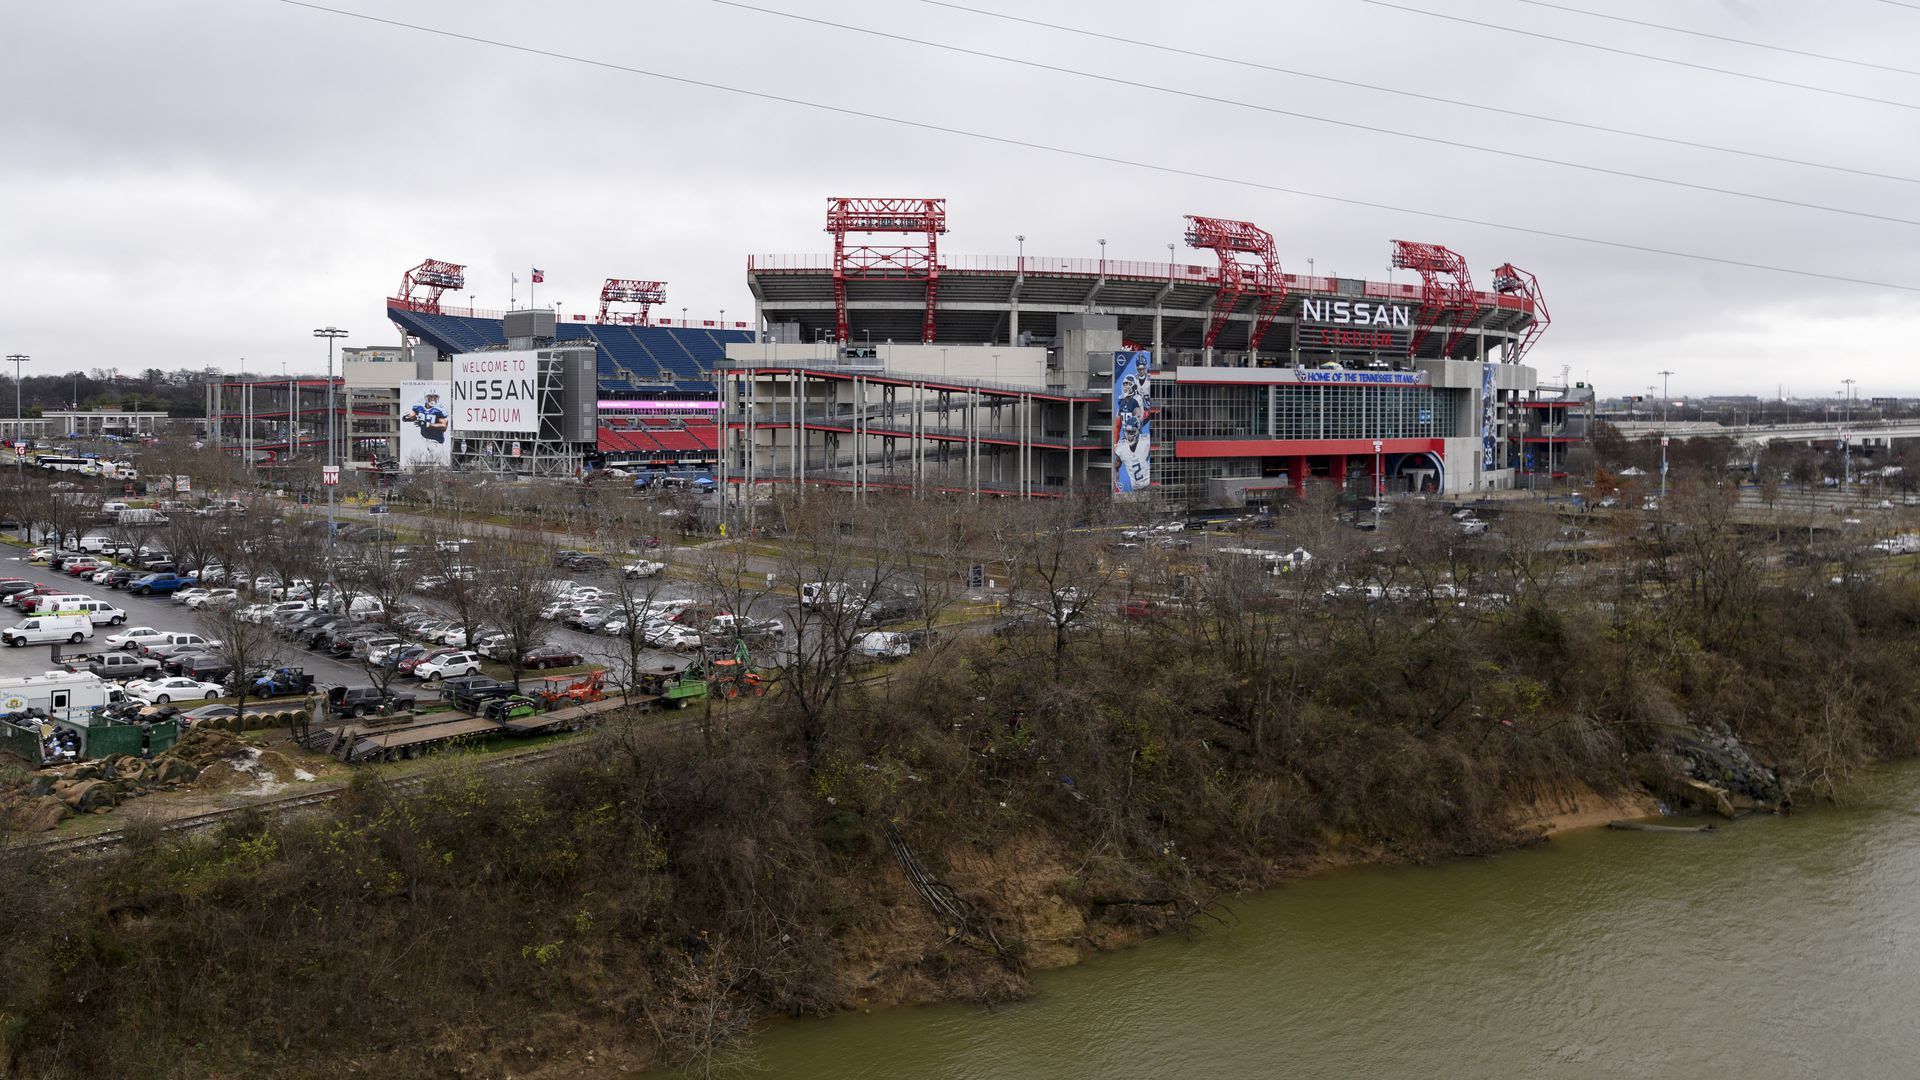 Nissan Stadium shot from across the river.